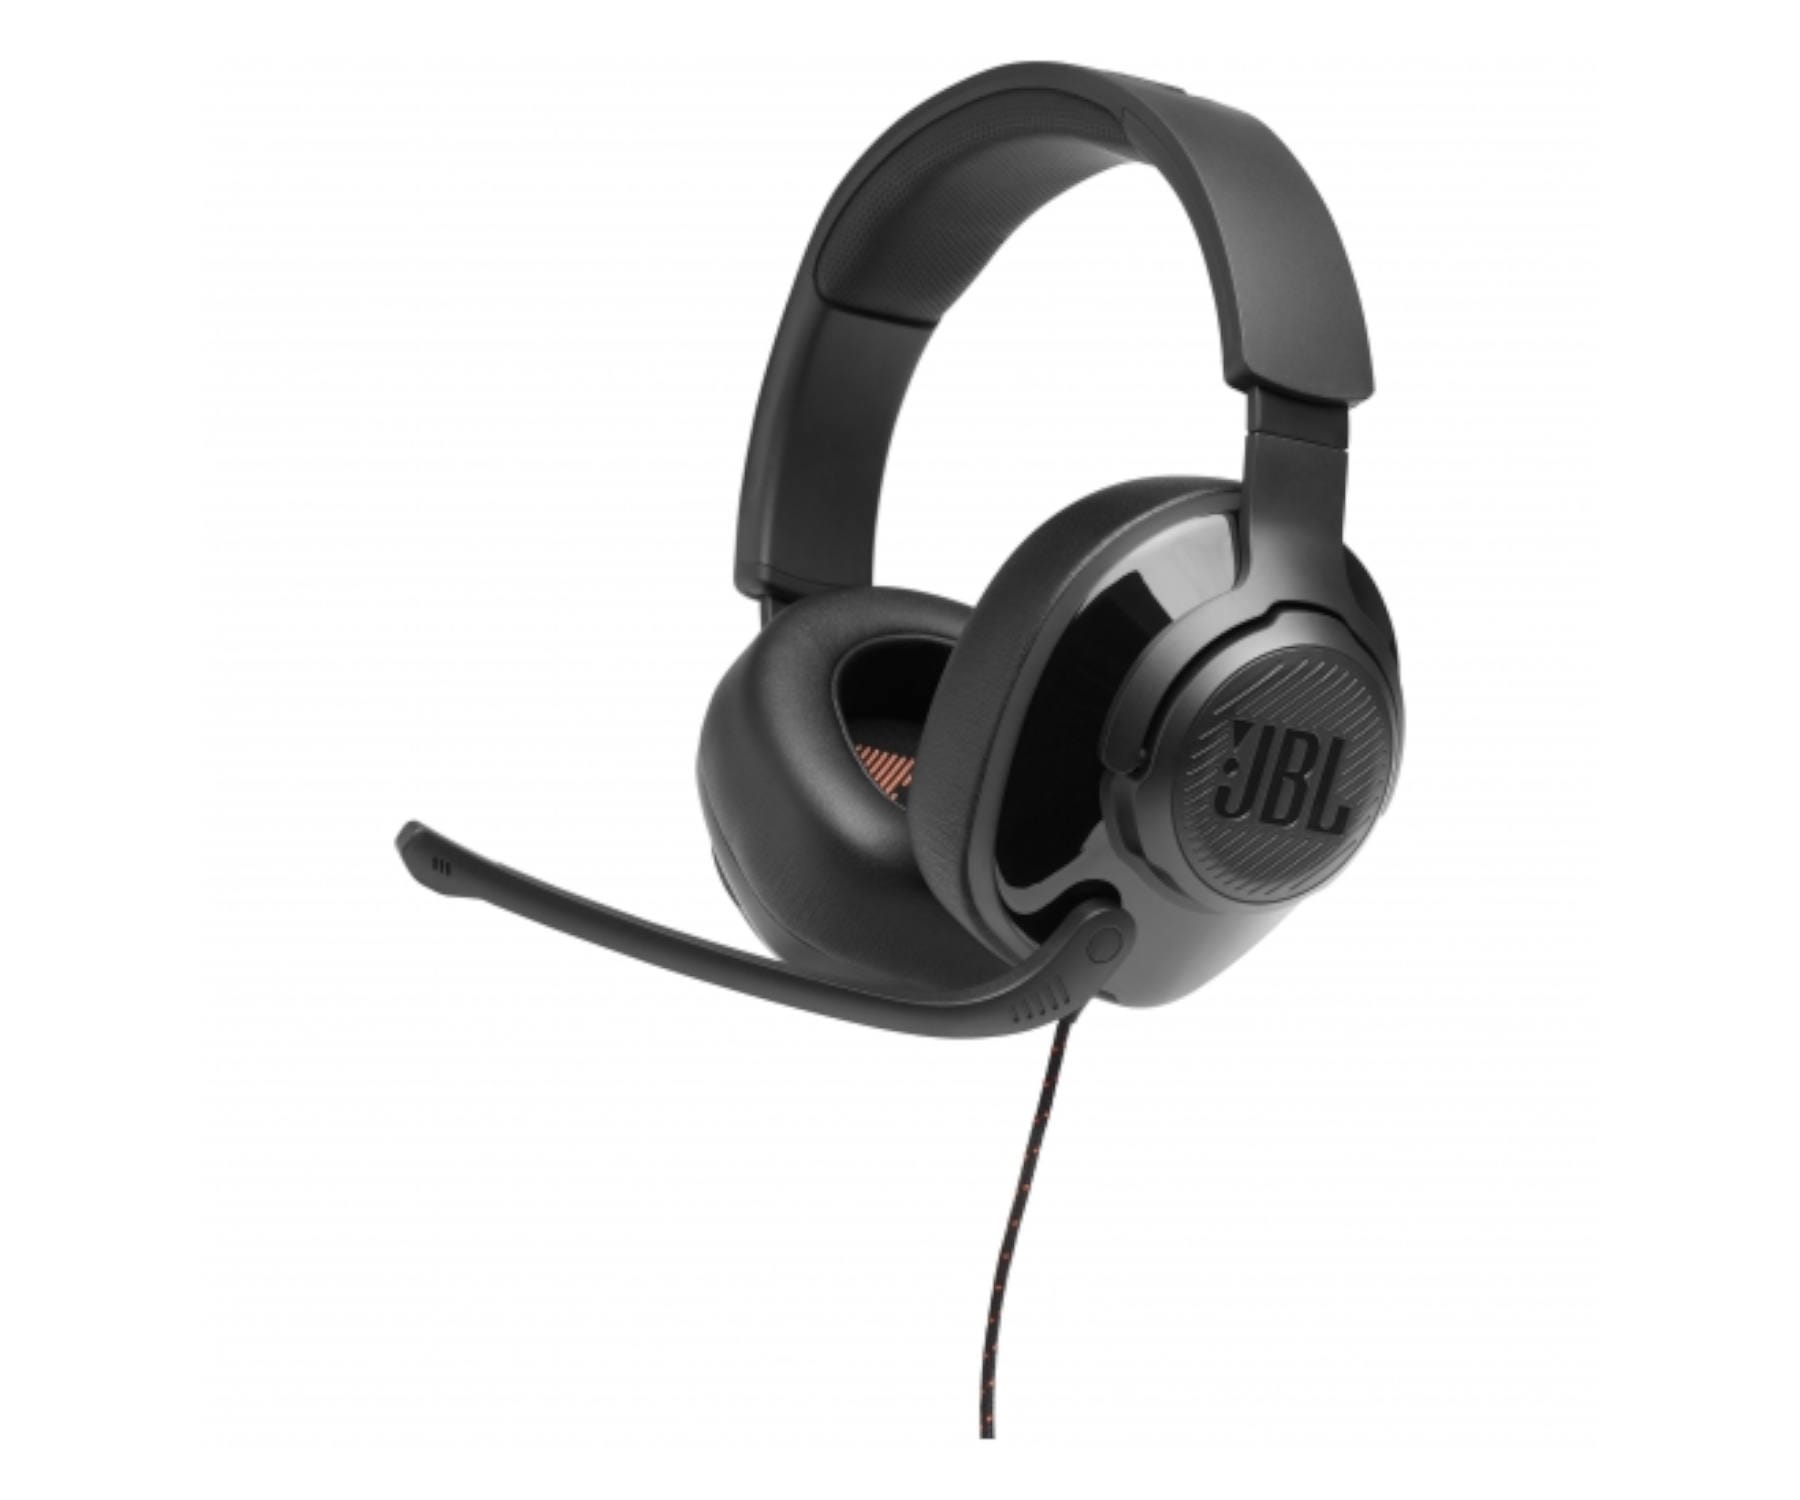 JBL Q200 NEGRO / AURICULARES GAMING OVEREAR CON CABLE